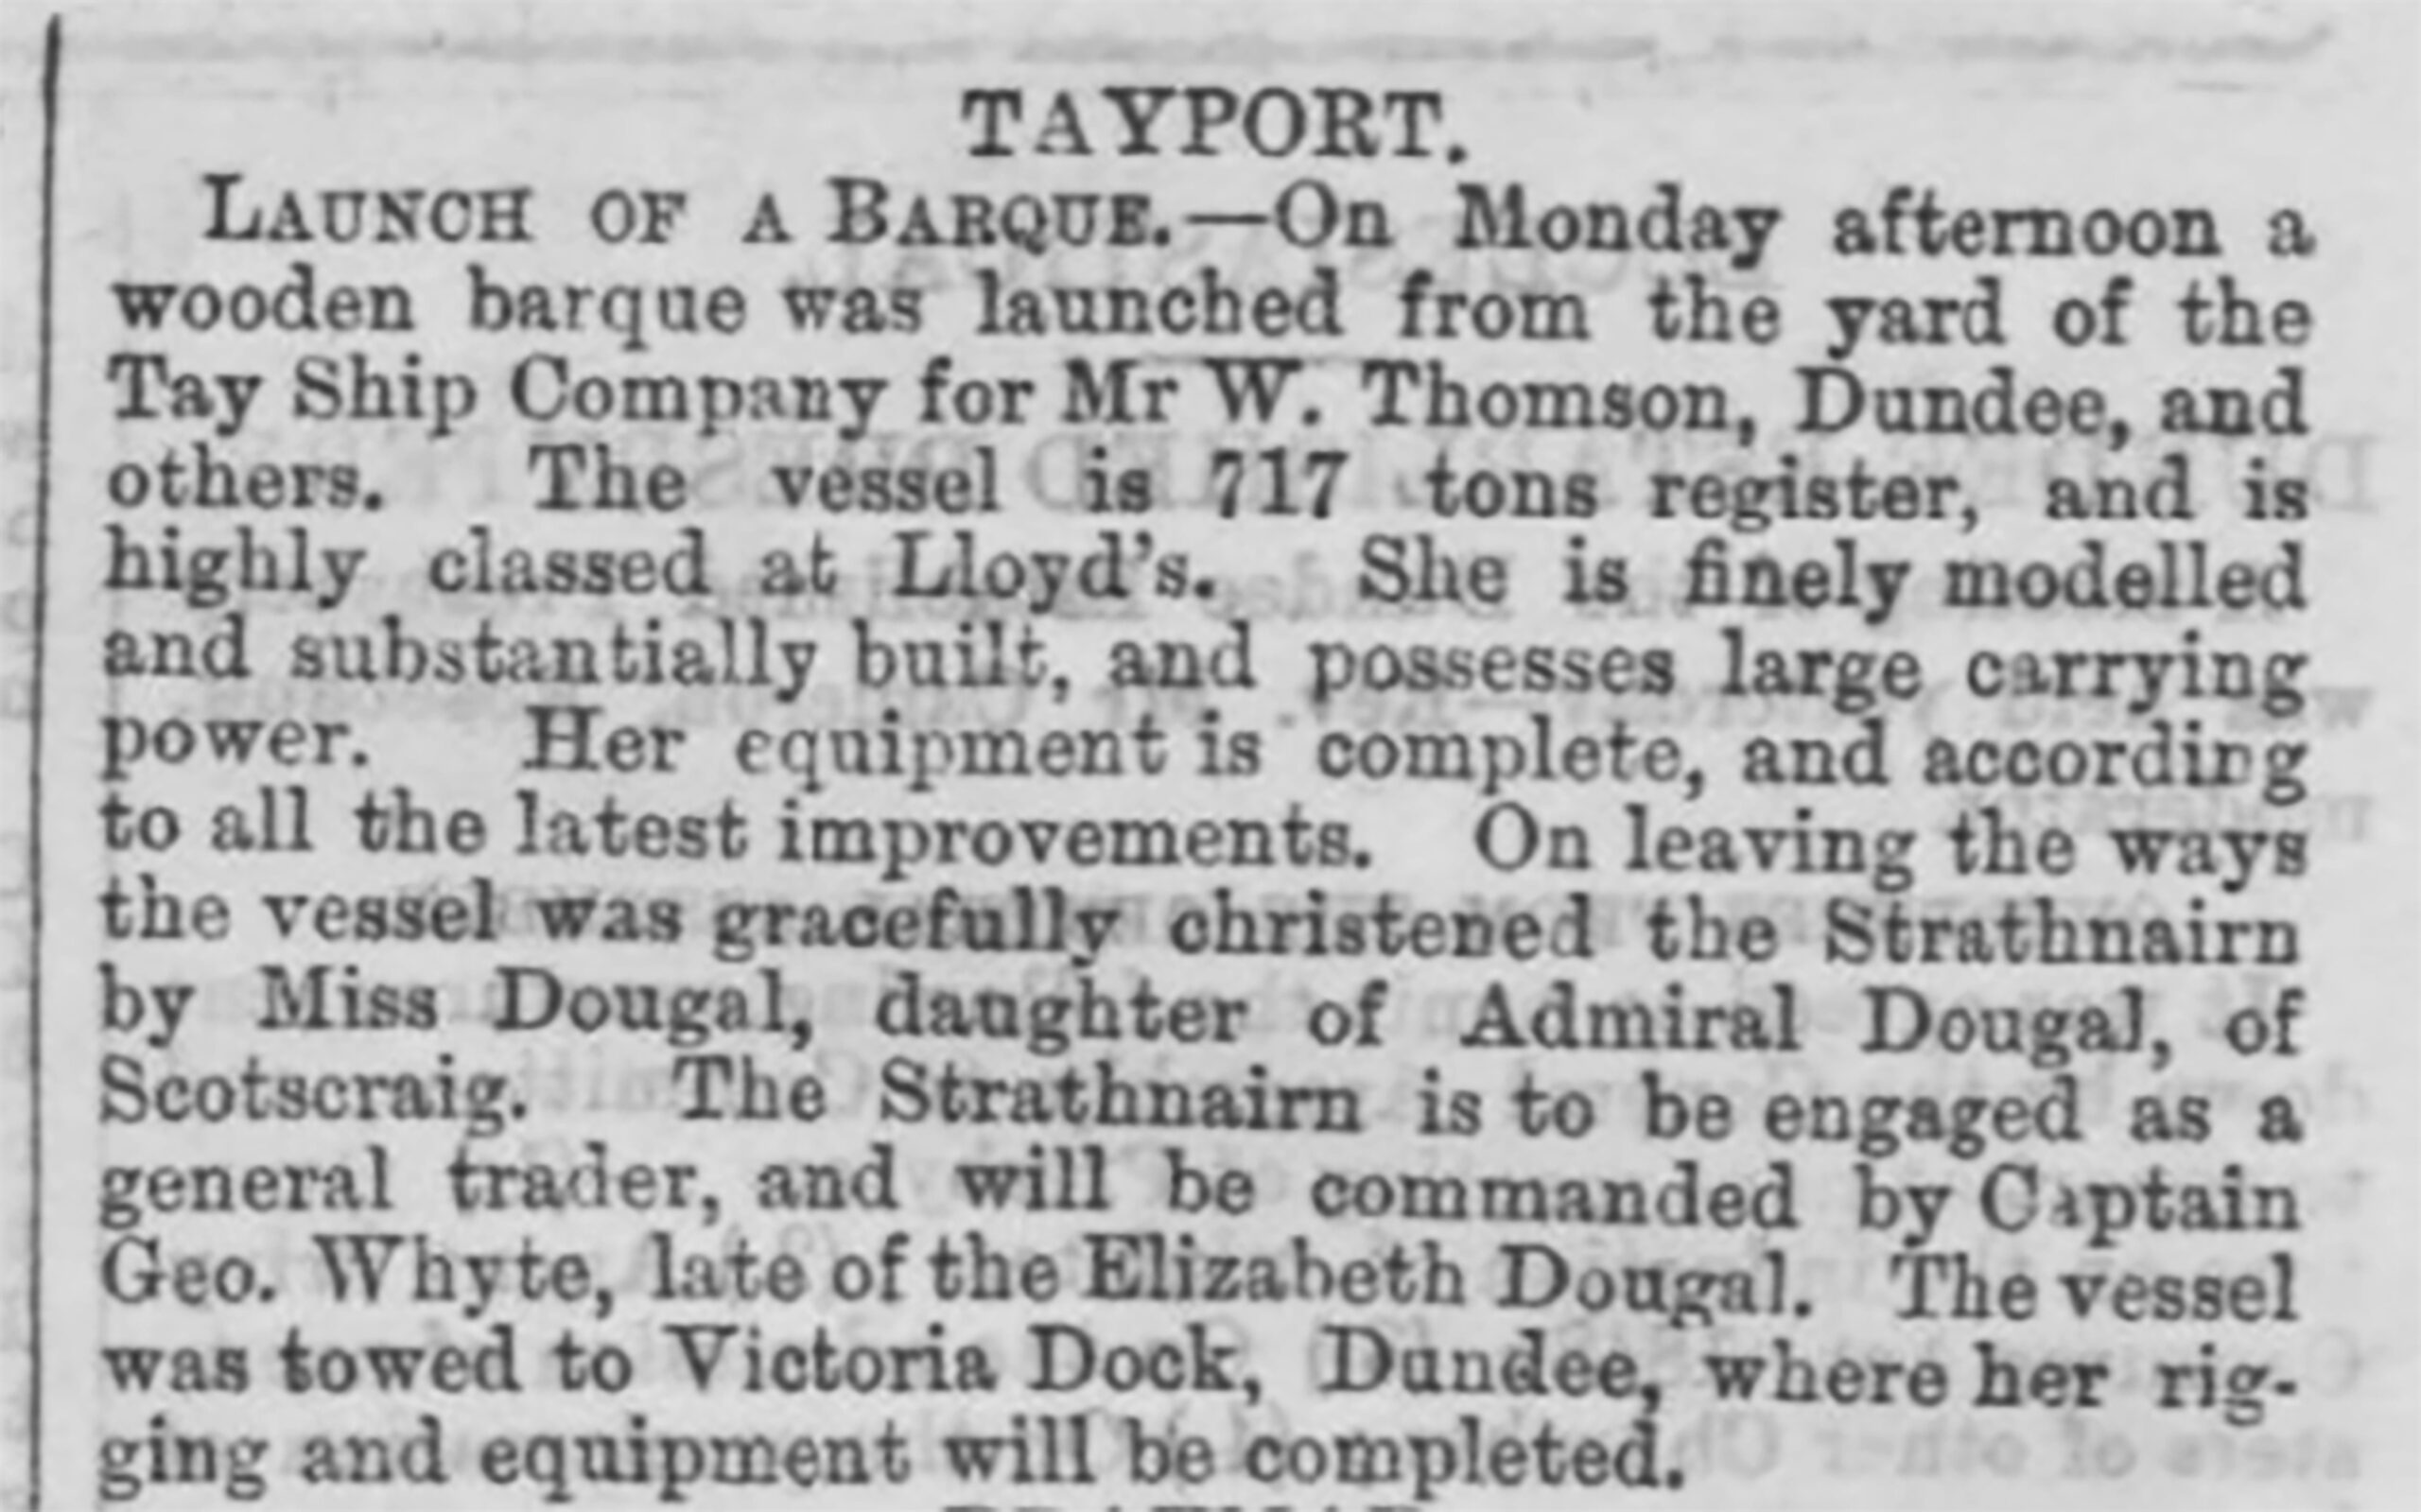 Tayport Heritage Trail - Board 4 - Report on the launch of The Strathnairn 5/10/1876